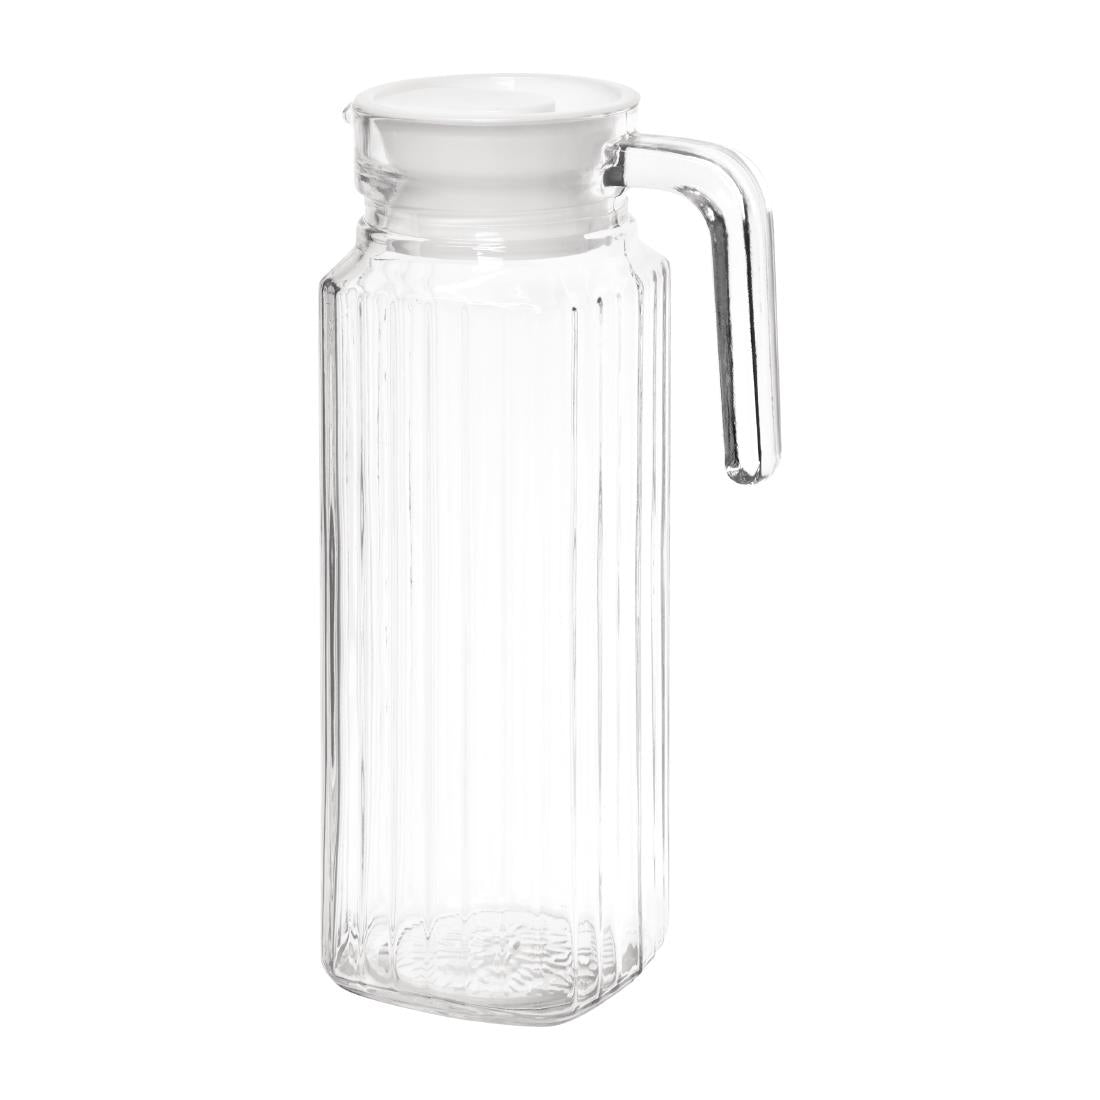 GF922 Olympia Ribbed Glass Jugs 1Ltr (Pack of 6) JD Catering Equipment Solutions Ltd